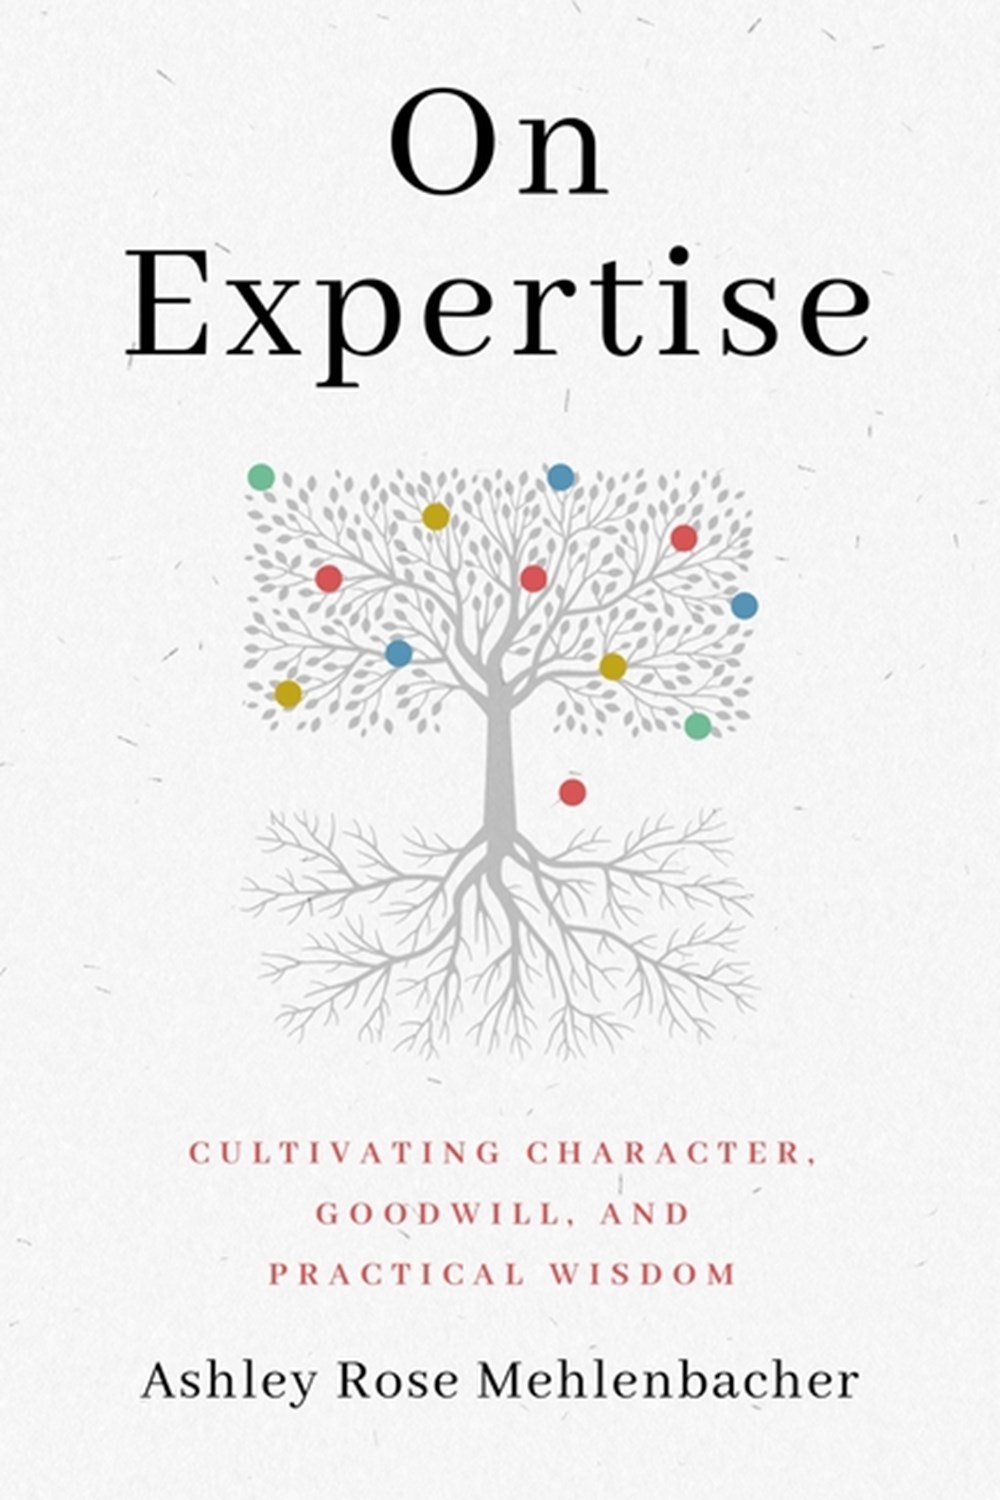 On Expertise Cultivating Character, Goodwill, and Practical Wisdom